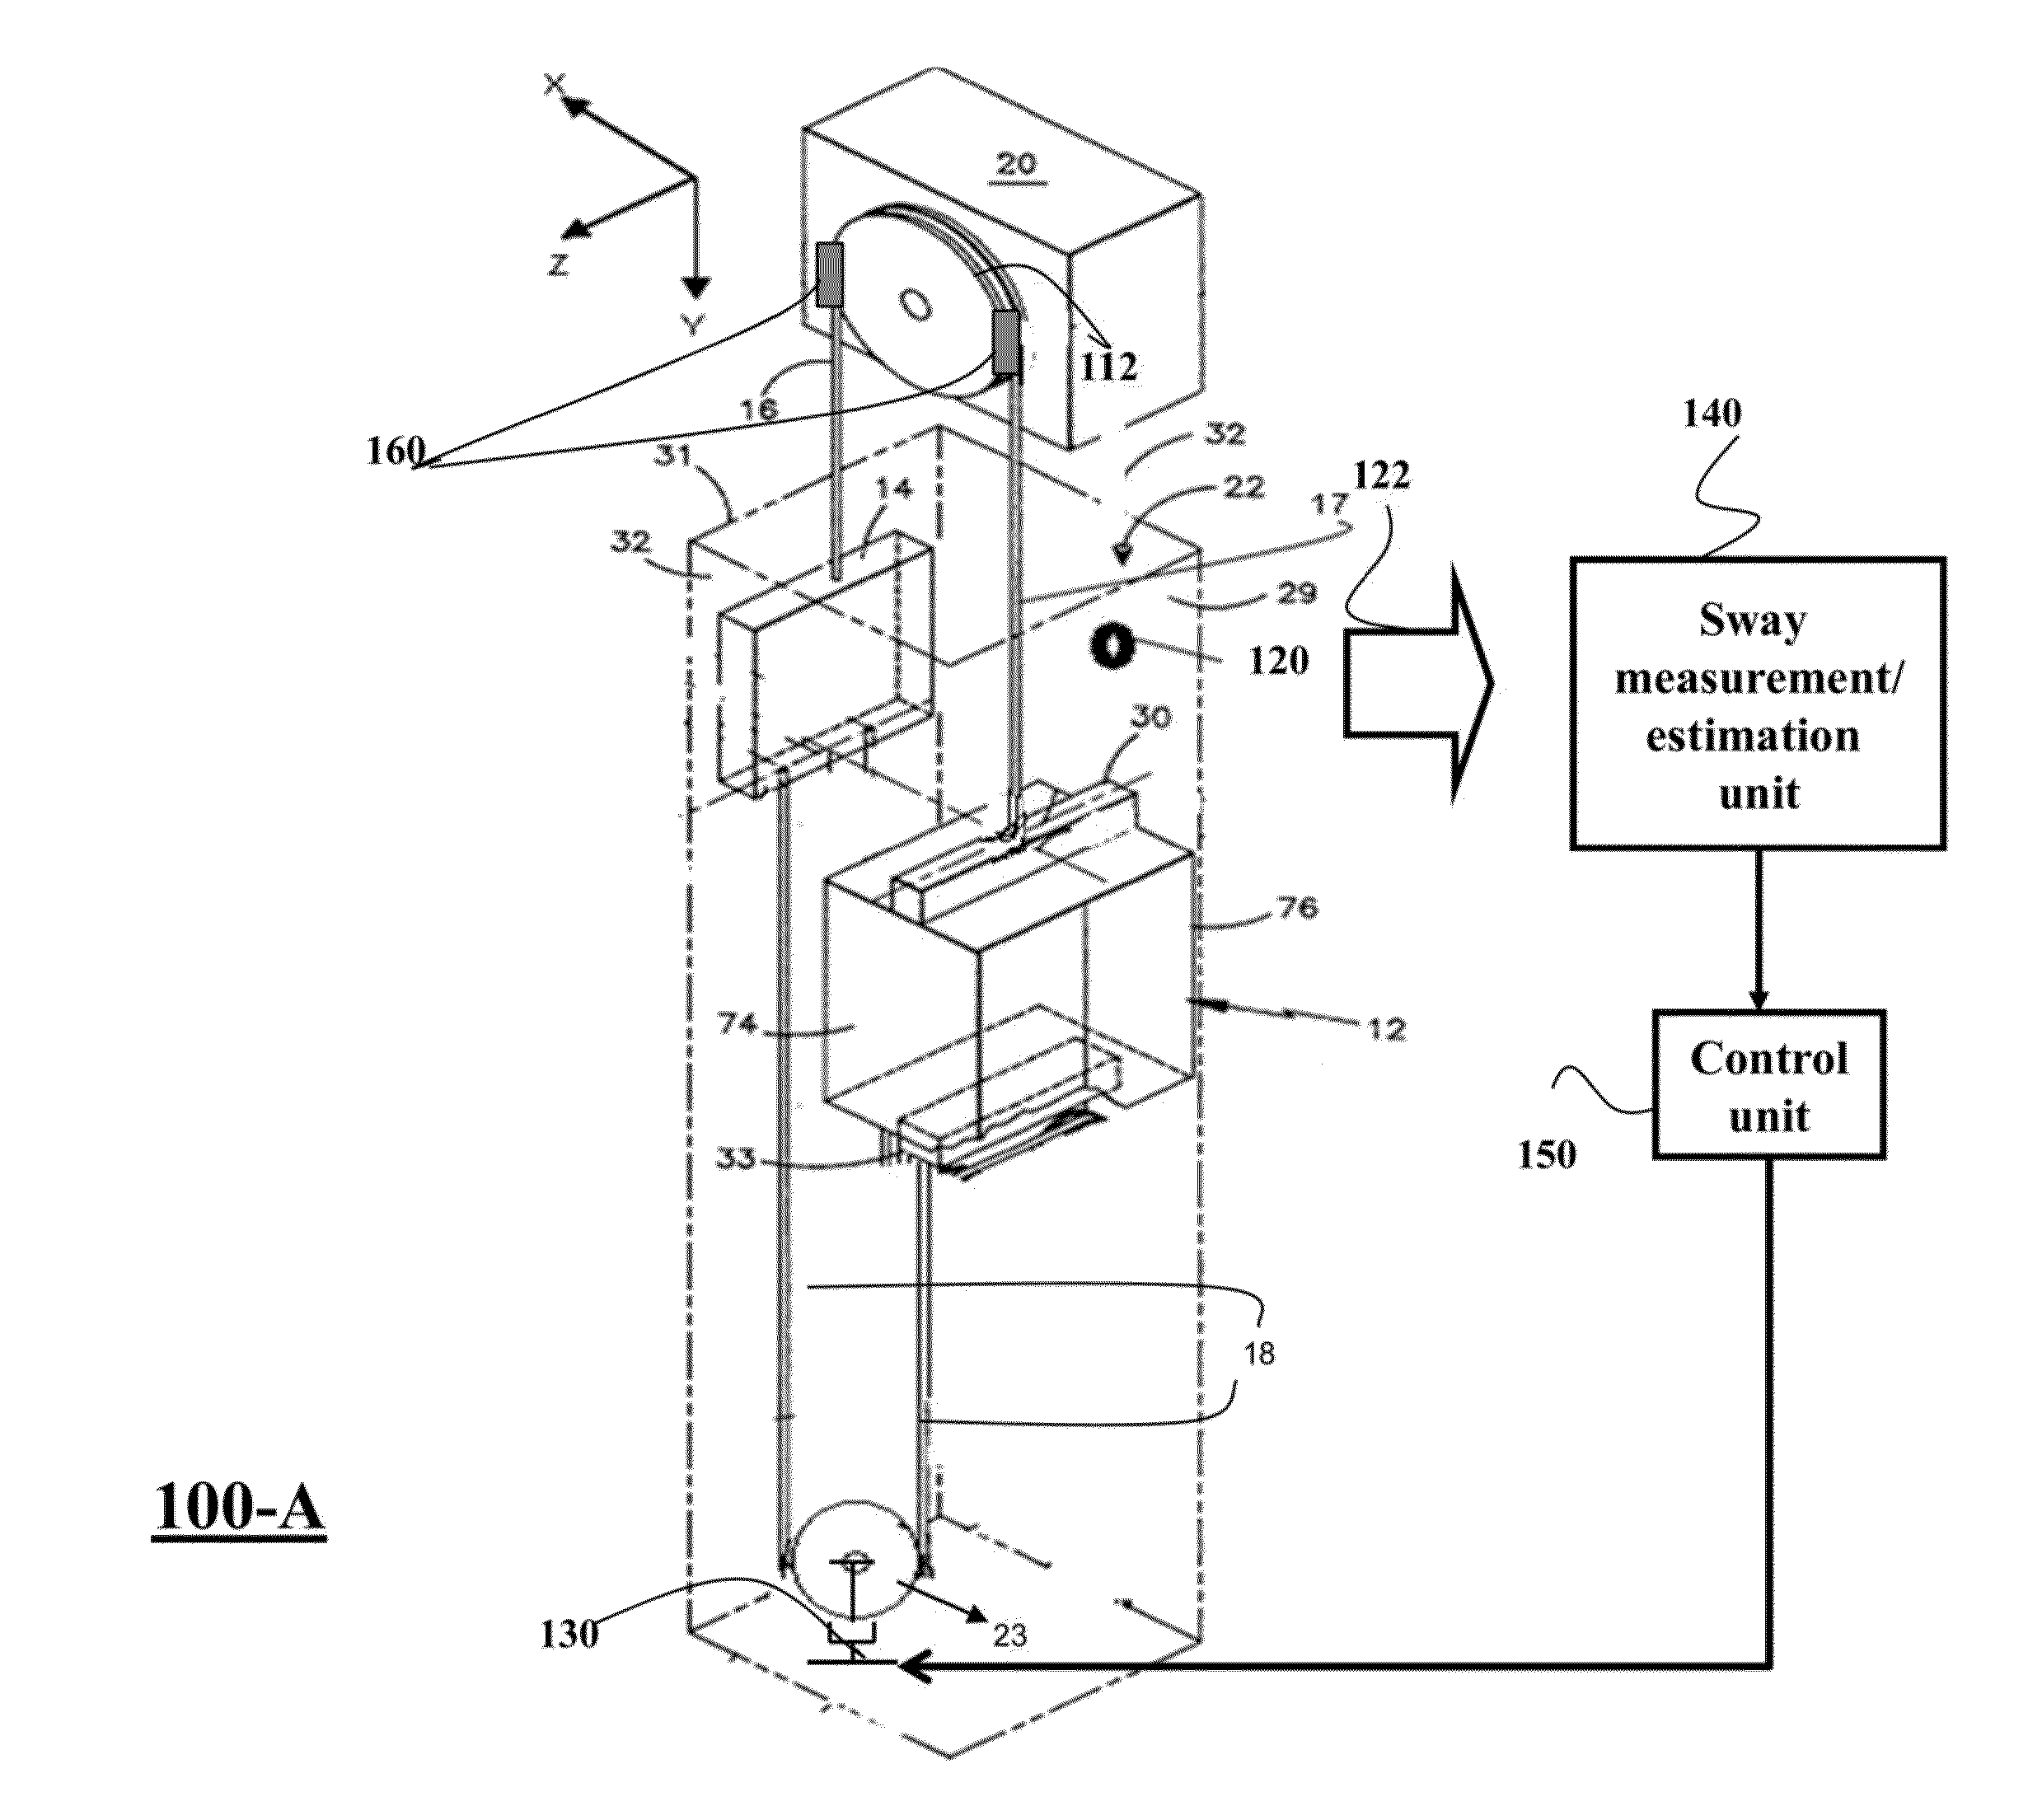 Method and System for Controlling Sway of Ropes in Elevator Systems by Modulating Tension on the Ropes